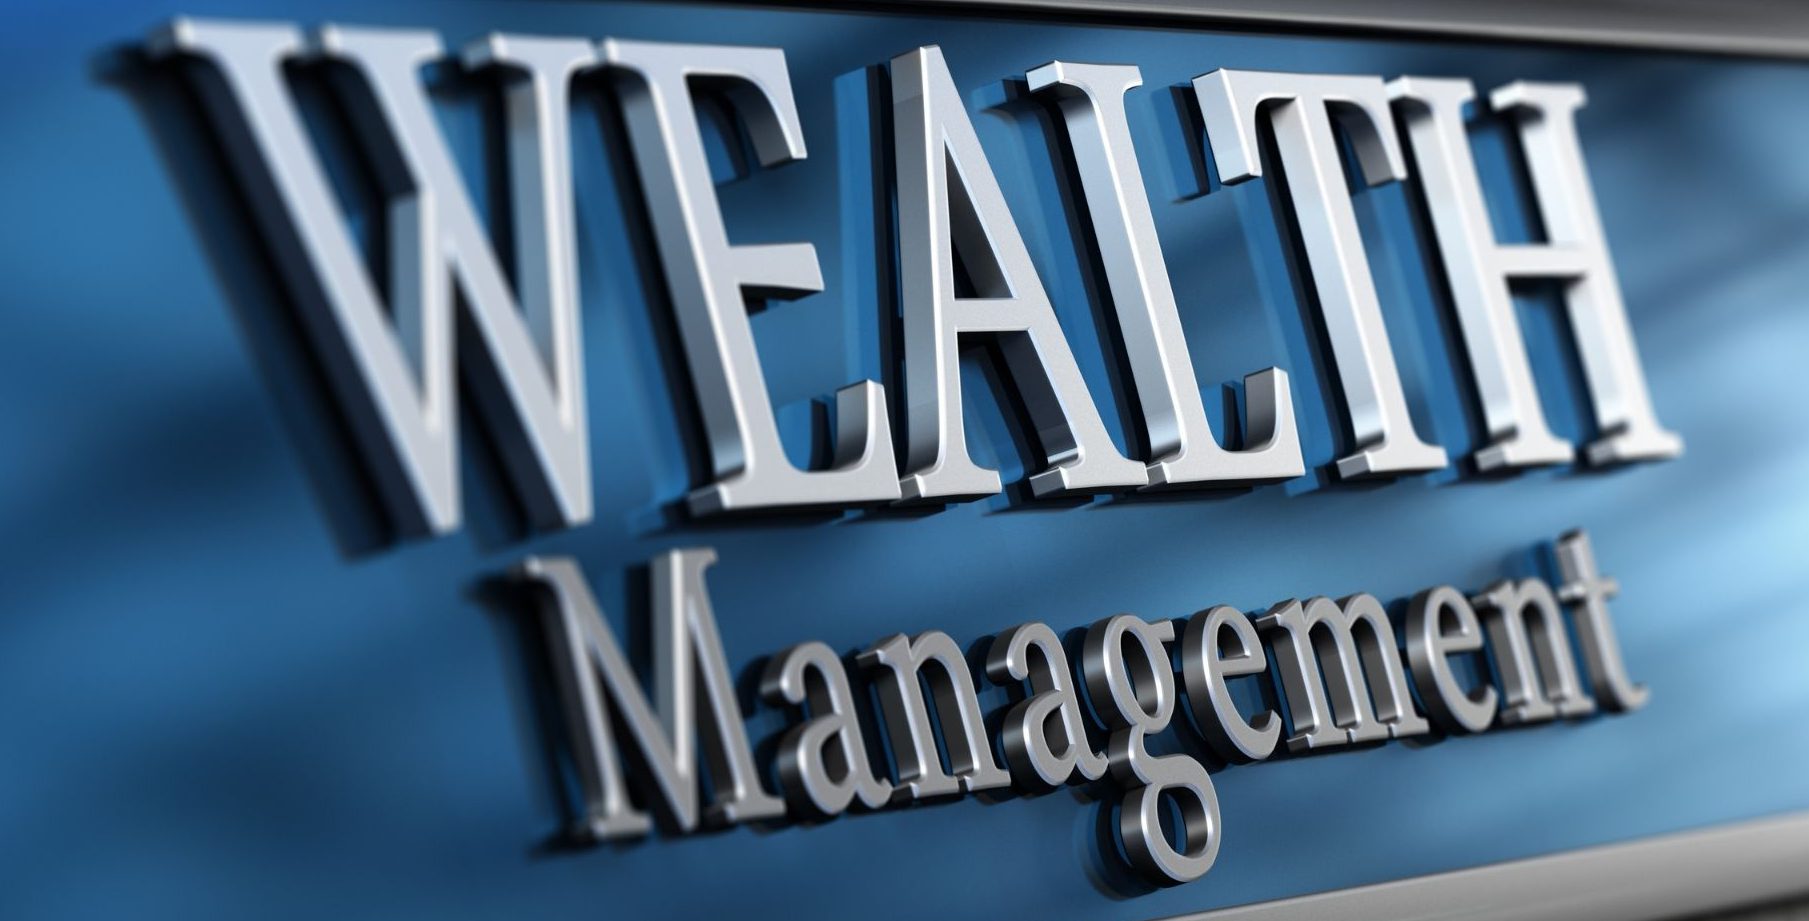 Global Wealth Management Market Outlook, Opportunities And Strategies